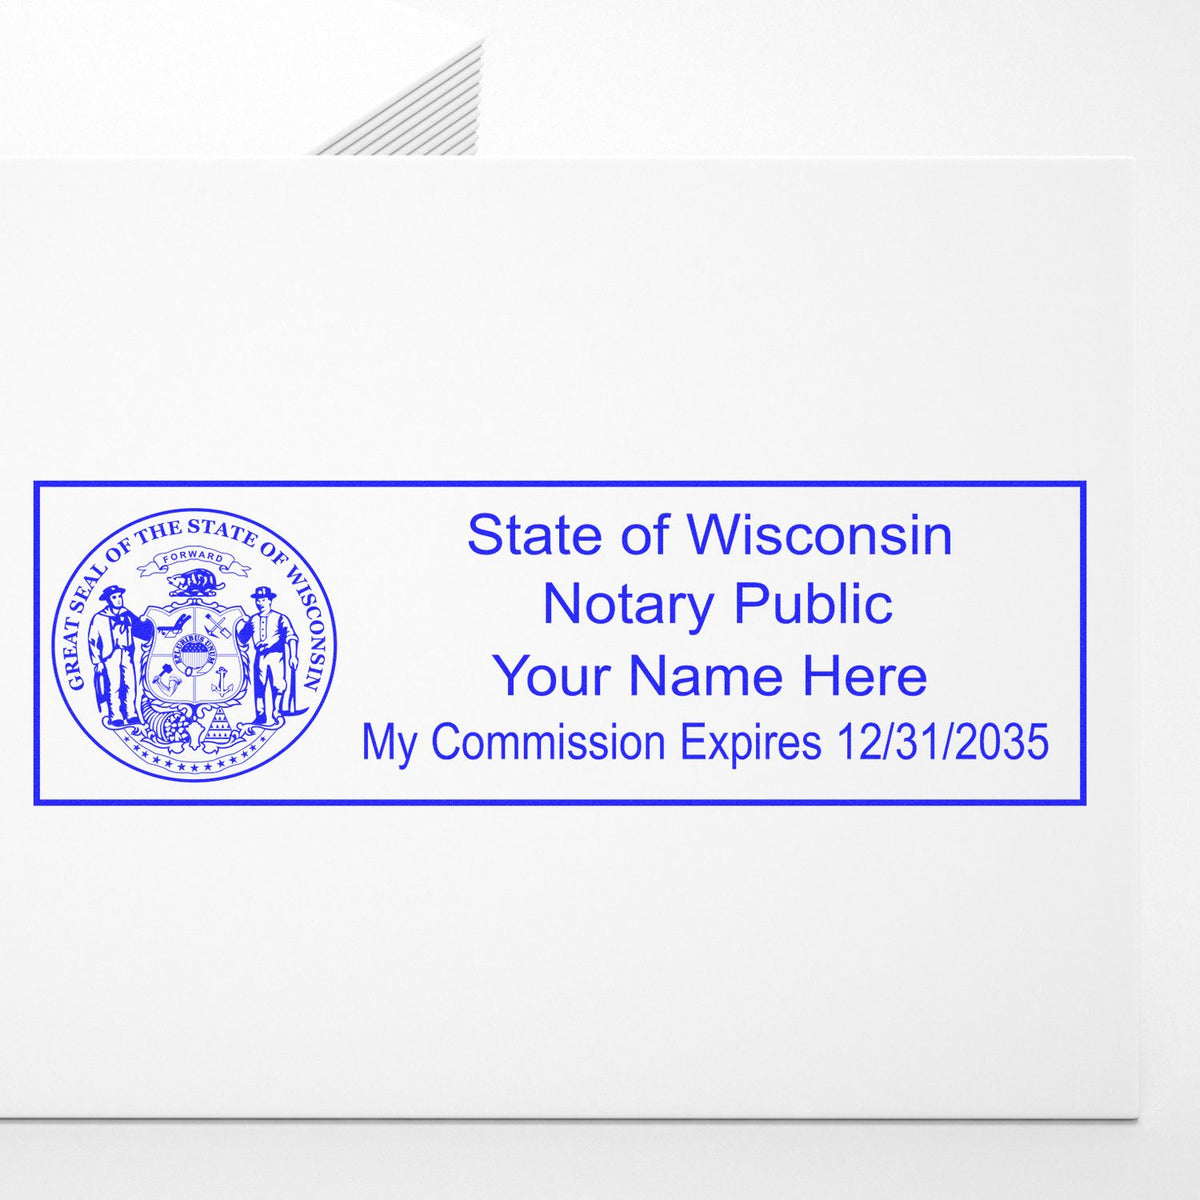 An alternative view of the Heavy-Duty Wisconsin Rectangular Notary Stamp stamped on a sheet of paper showing the image in use